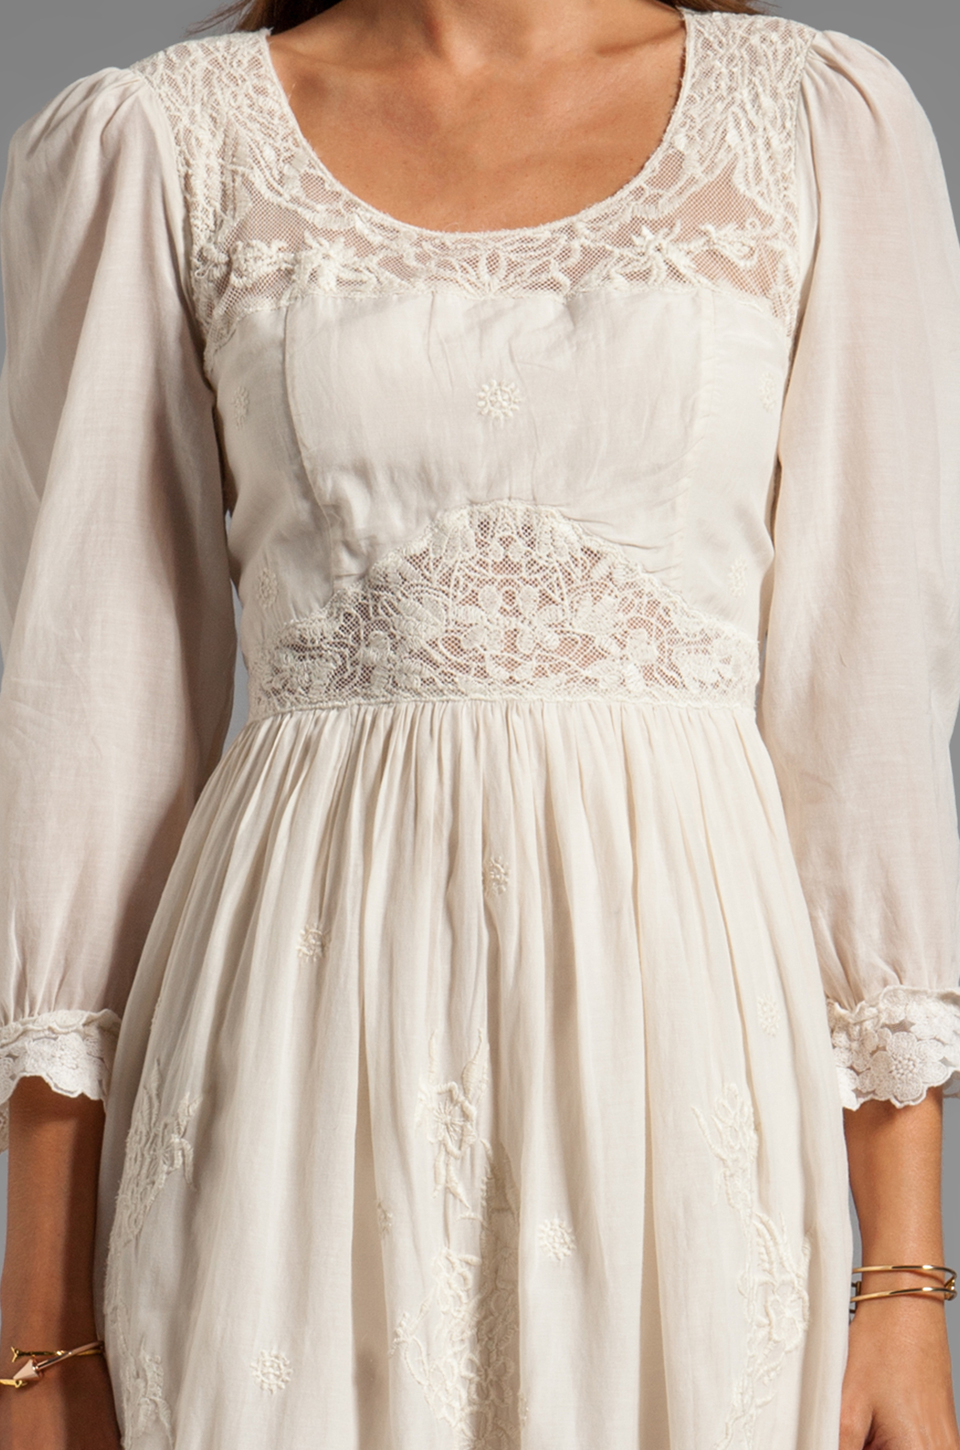 Lyst - Free People Montana Dress in Ivory in Natural